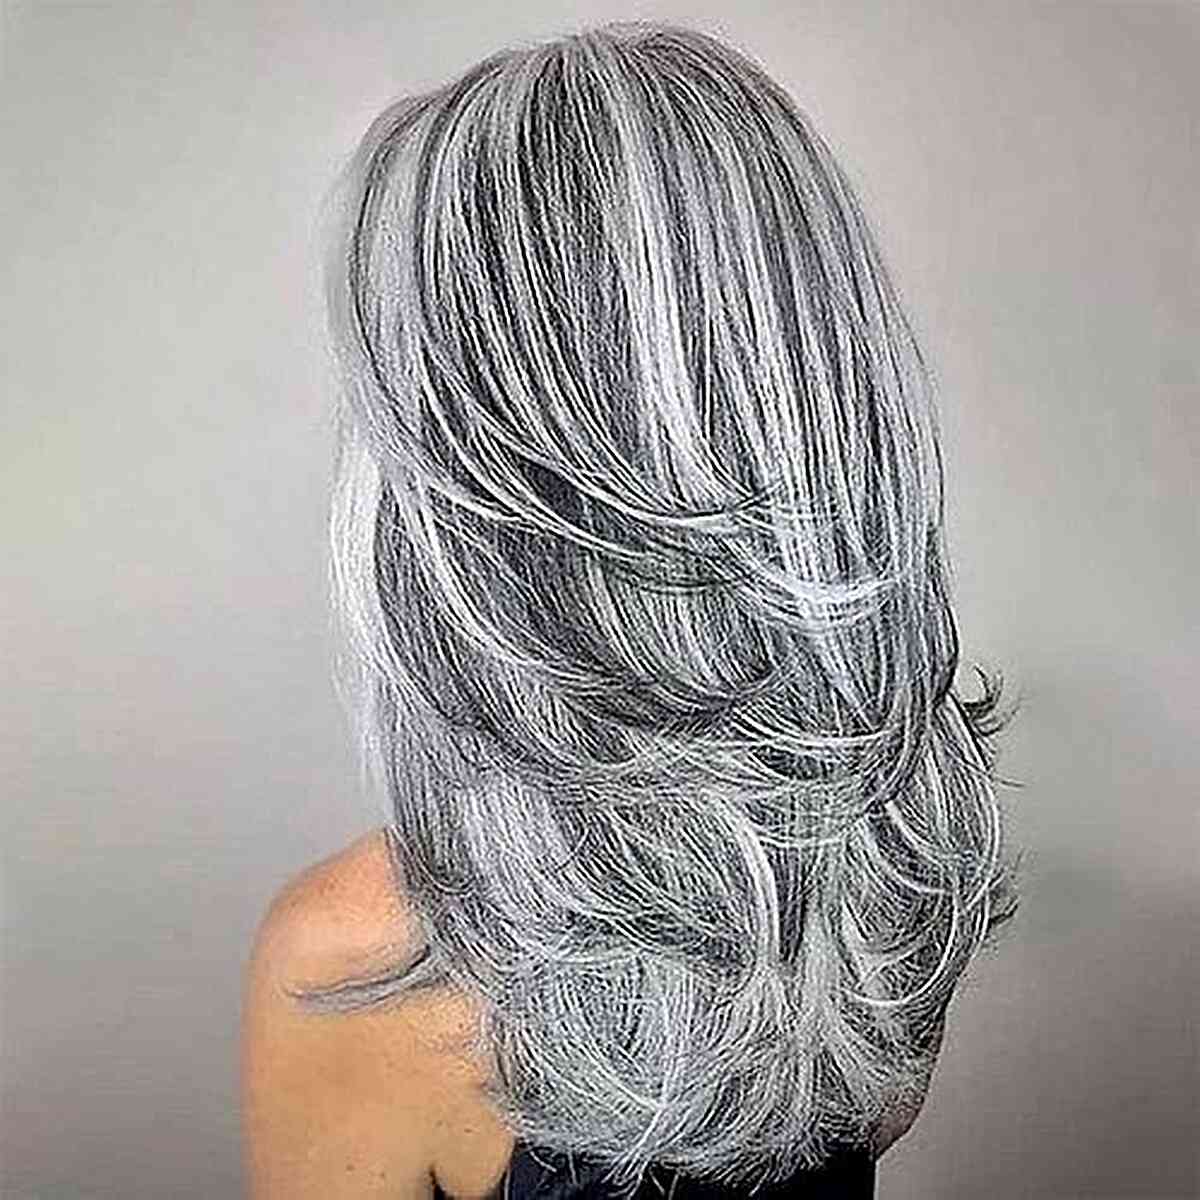 48 Stunning Silver Hair Color Ideas for 2023